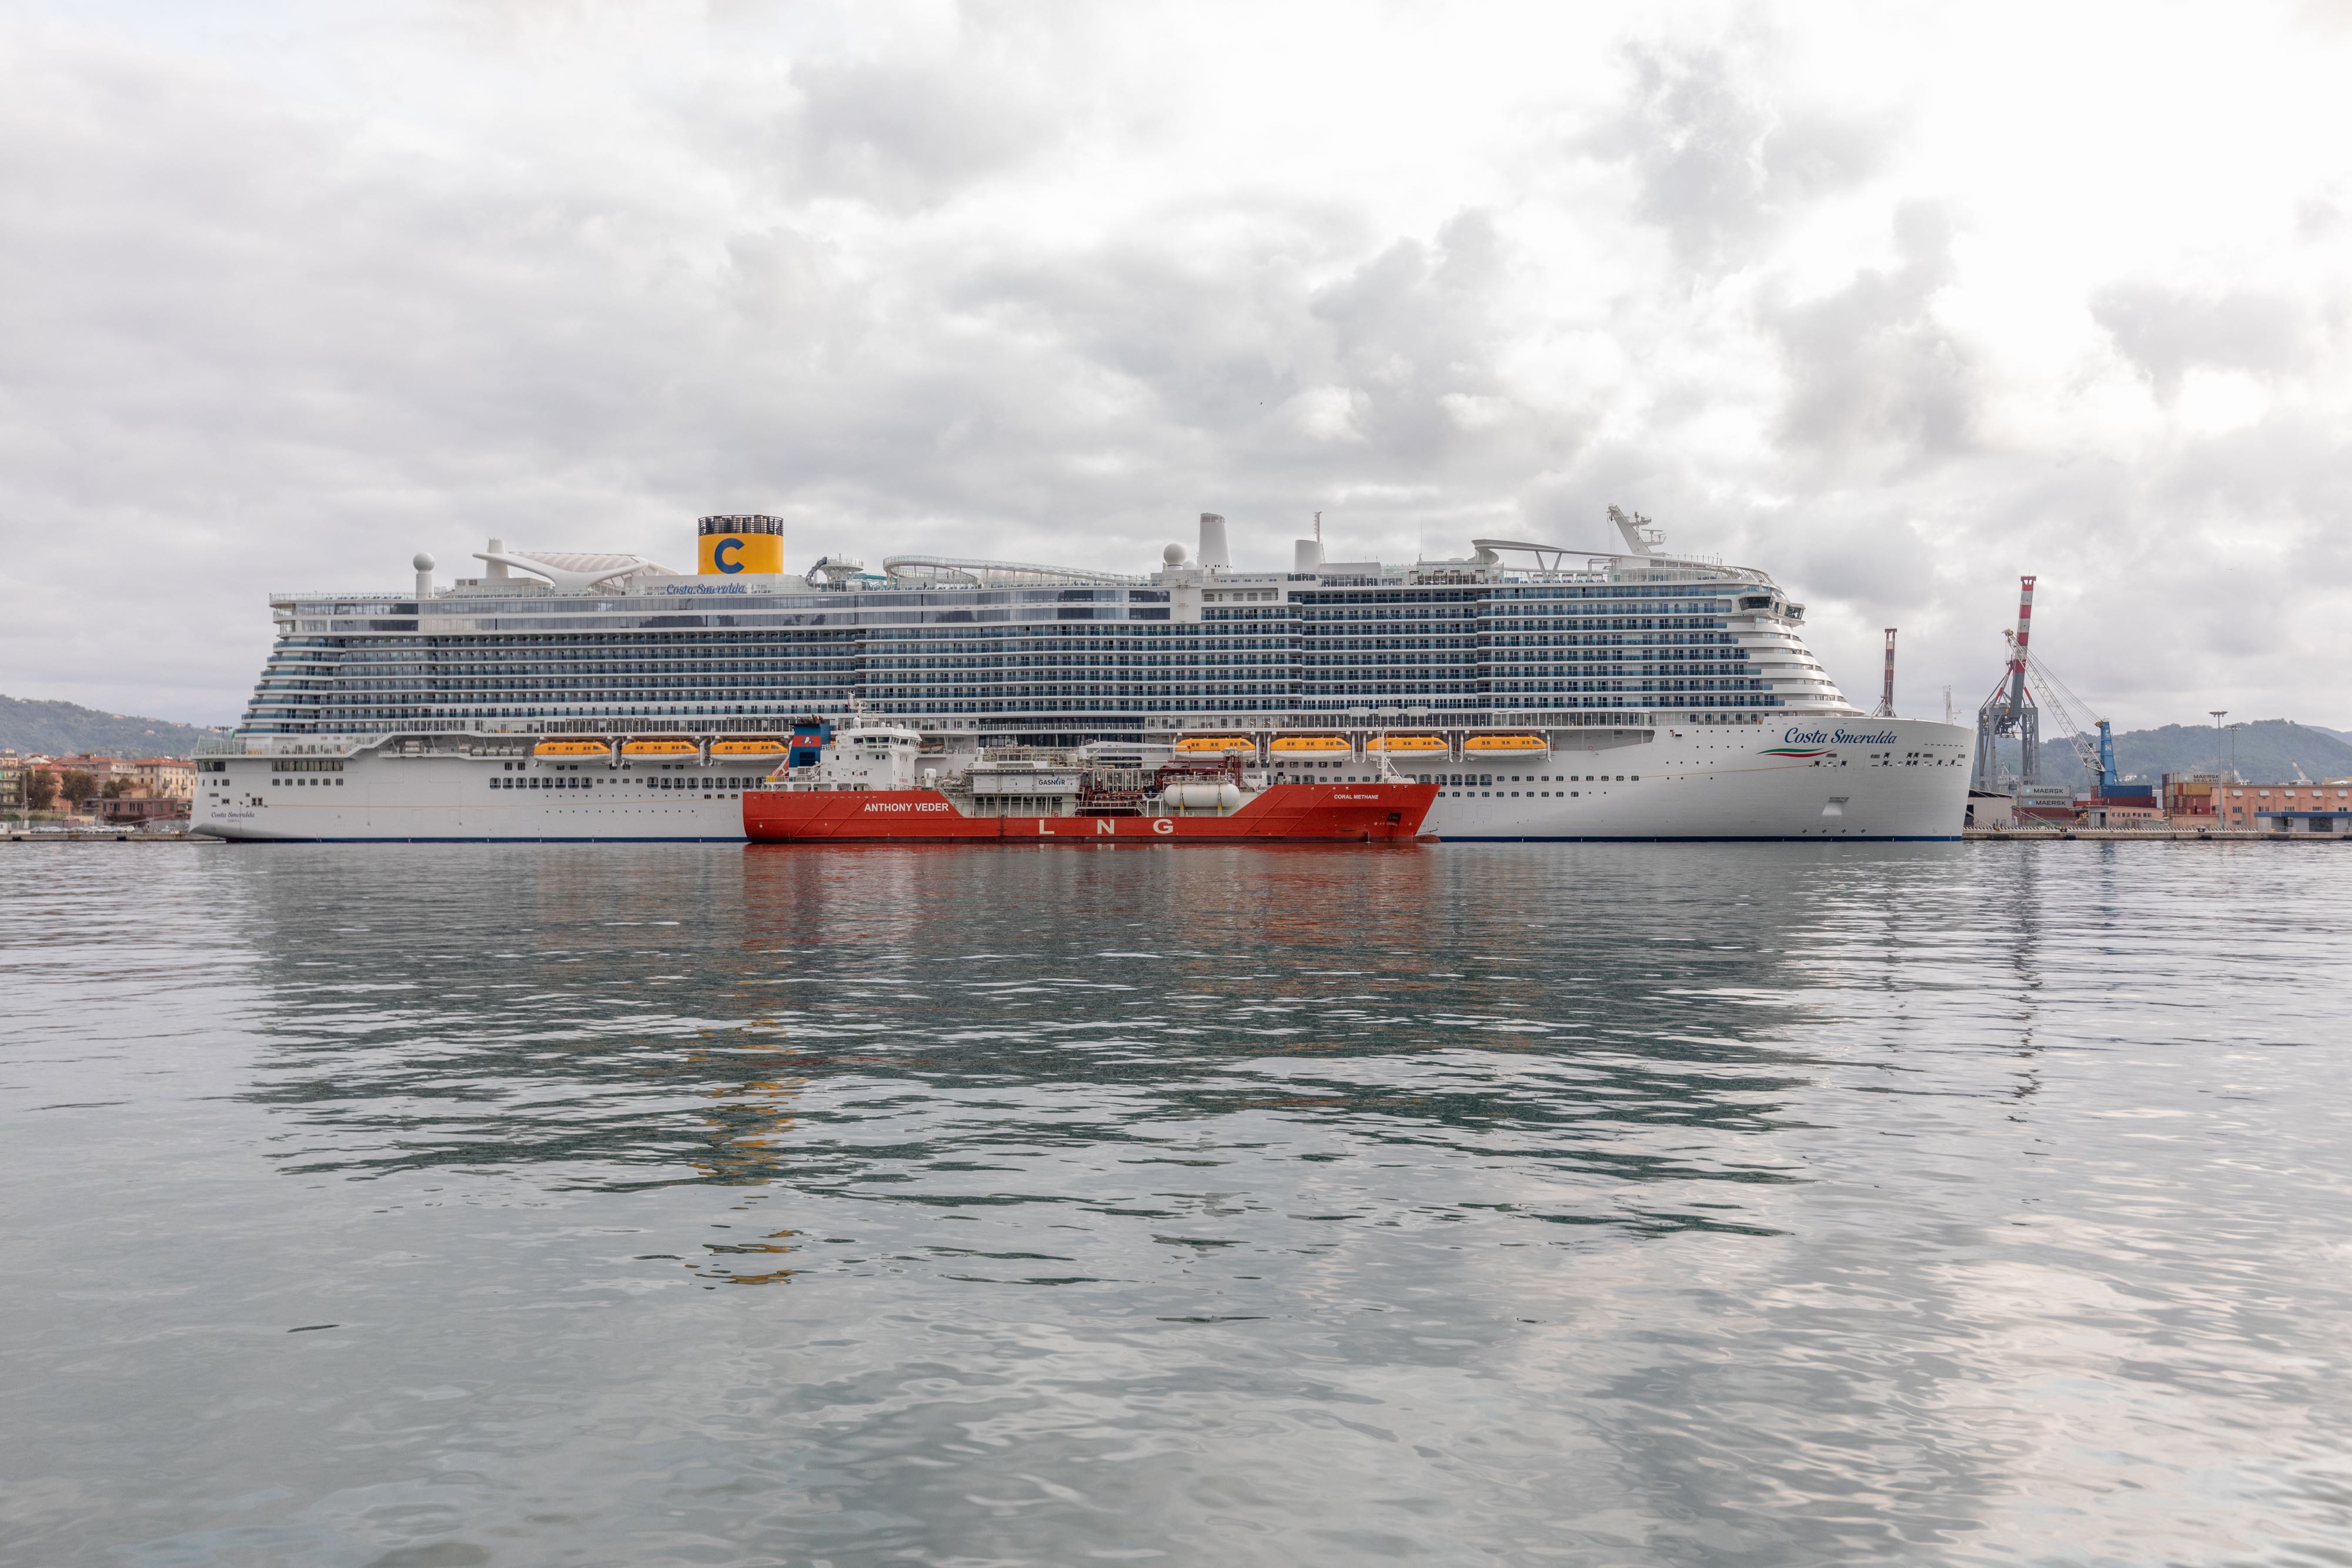 Costa Cruises in Italy's first LNG bunkering operation